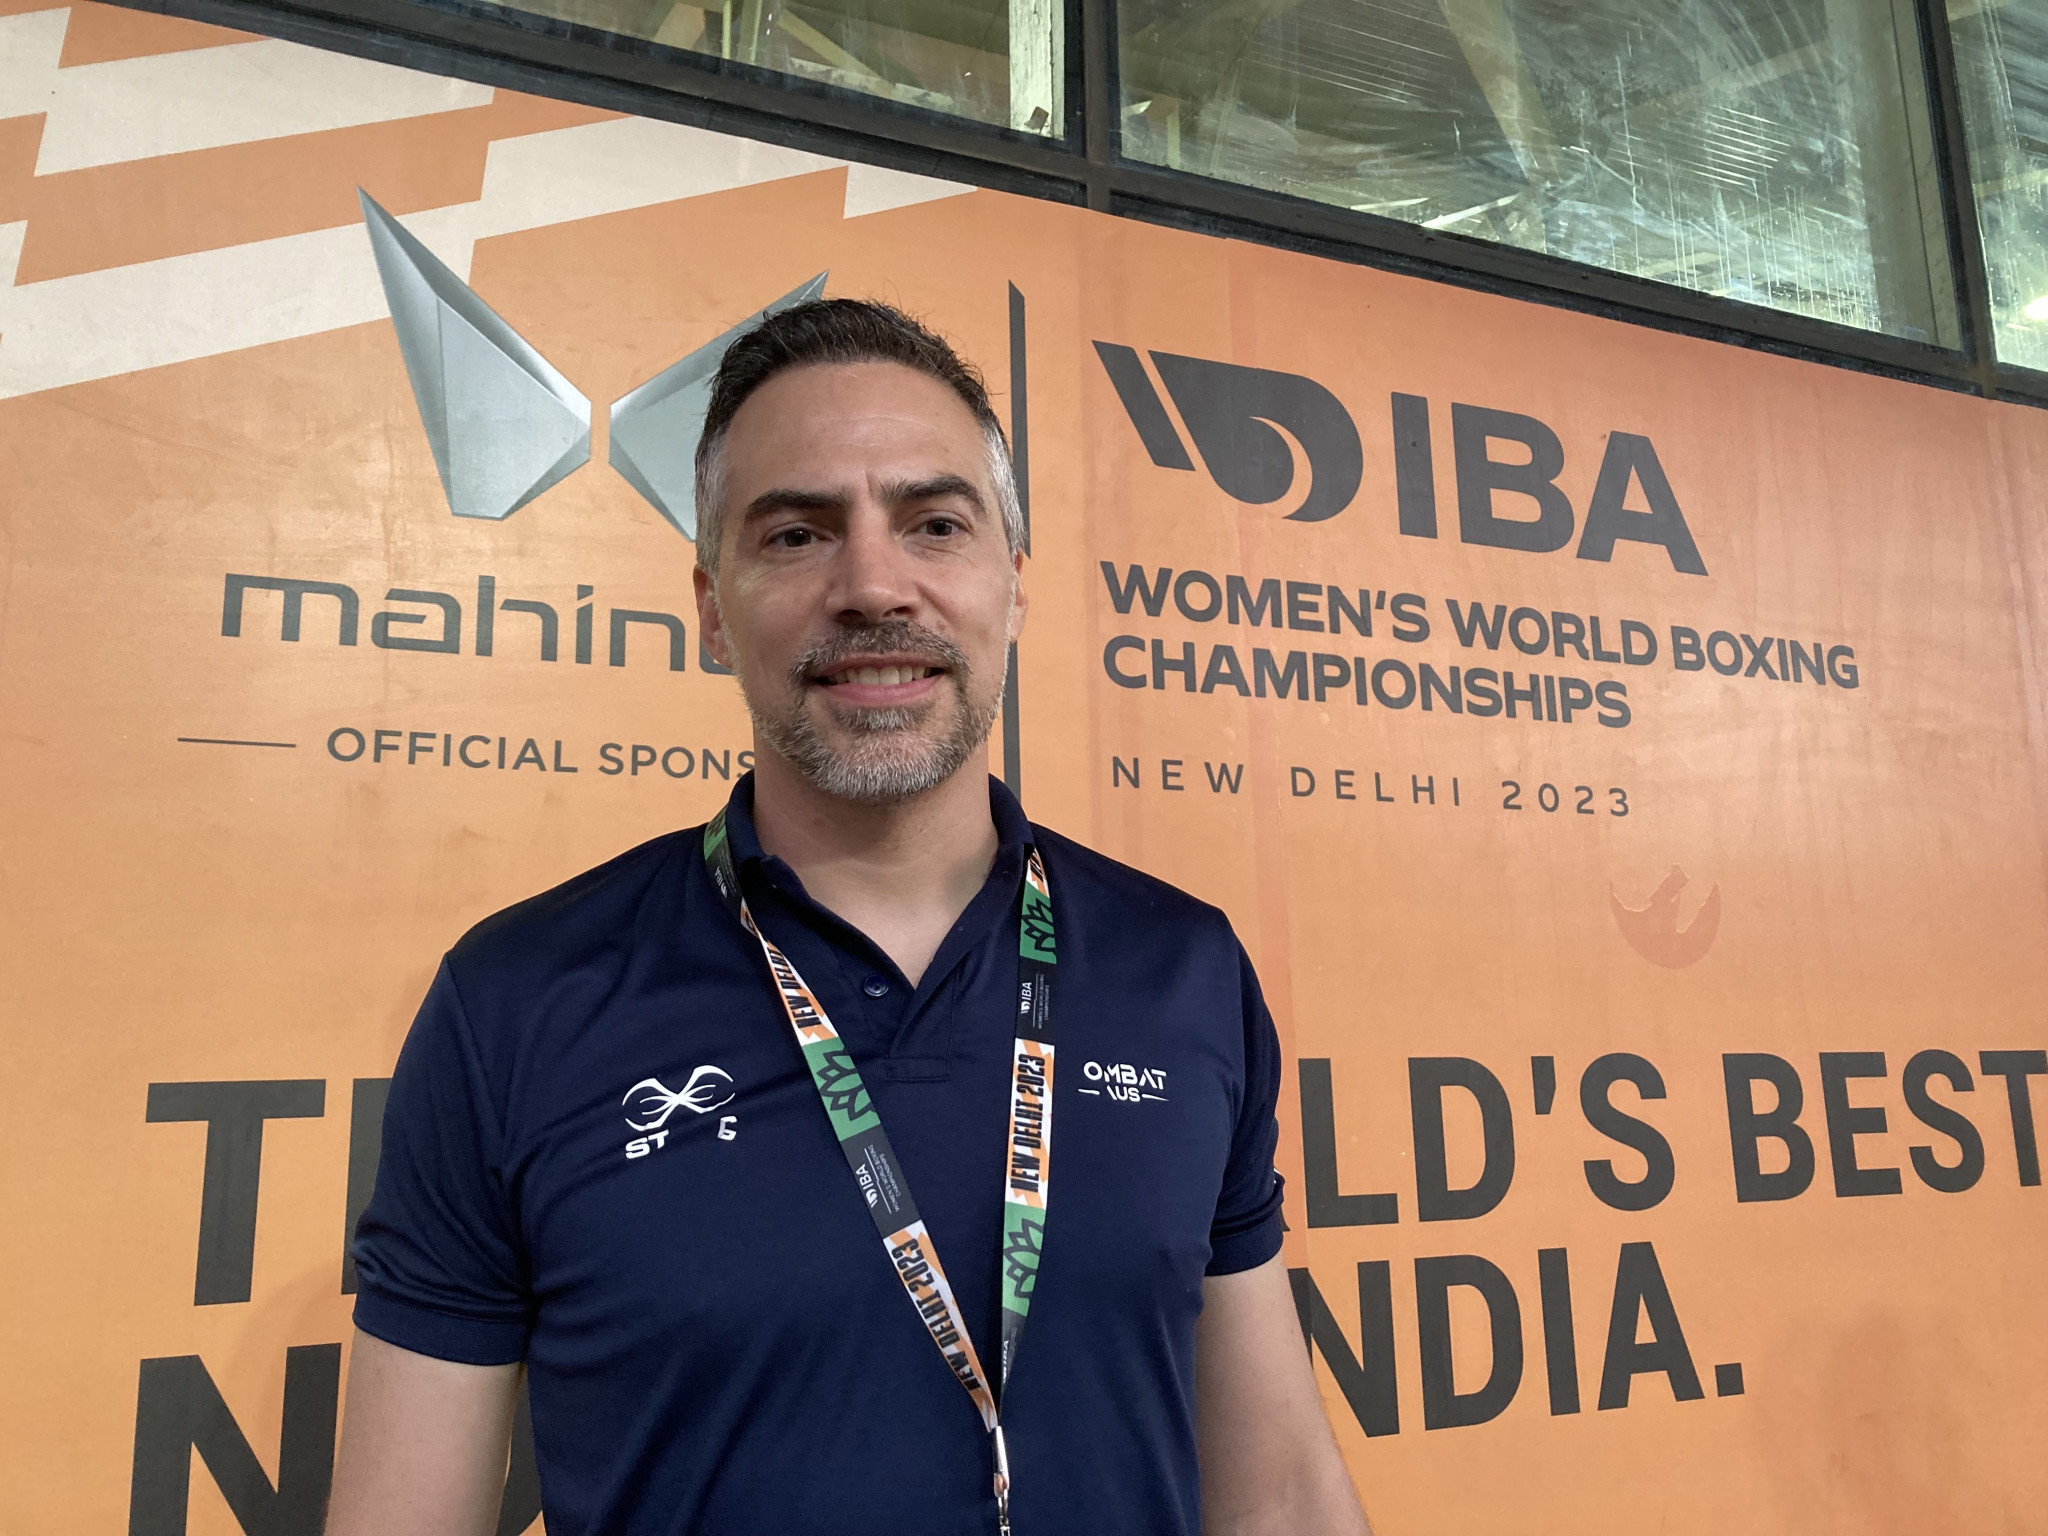 Australian head coach Santiago Nieva has claimed that he was not instructed not to send a team to New Delhi before Boxing Australia being a member of the Common Cause Alliance ©IBA